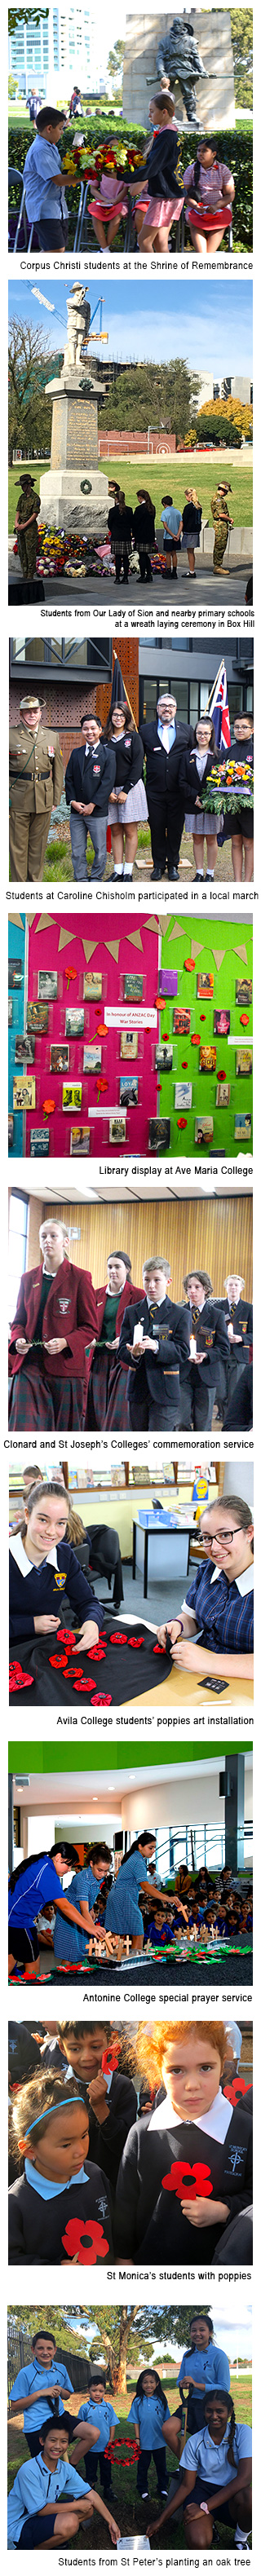 Anzac Day commemorations and activities in various Catholic schools across the Archdiocese of Melbourne